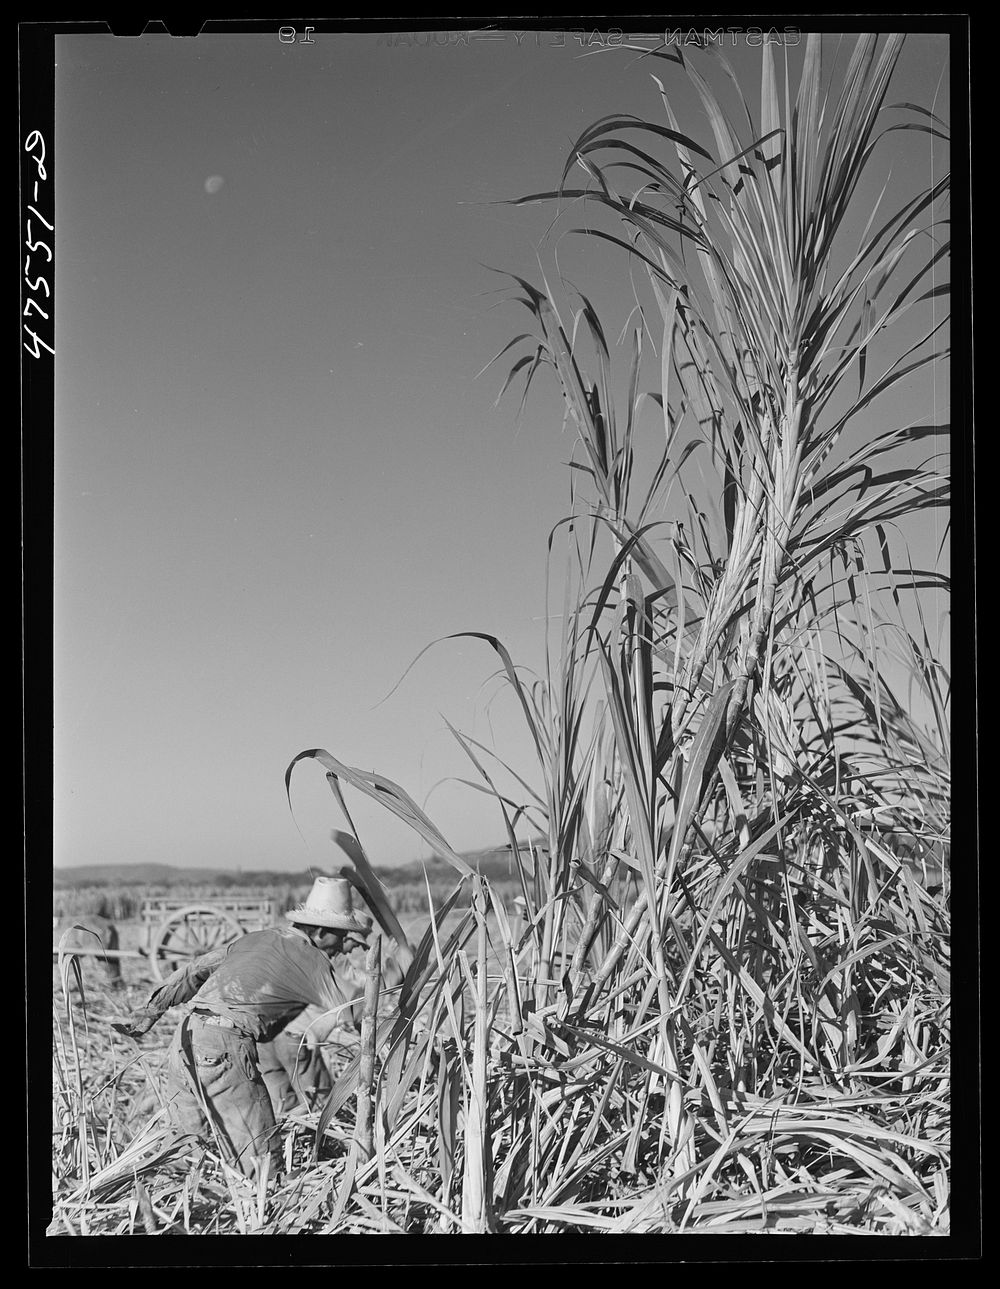 Guanica, Puerto Rico (vicinity). Cutting sugar cane in the rich sugar area. Sourced from the Library of Congress.